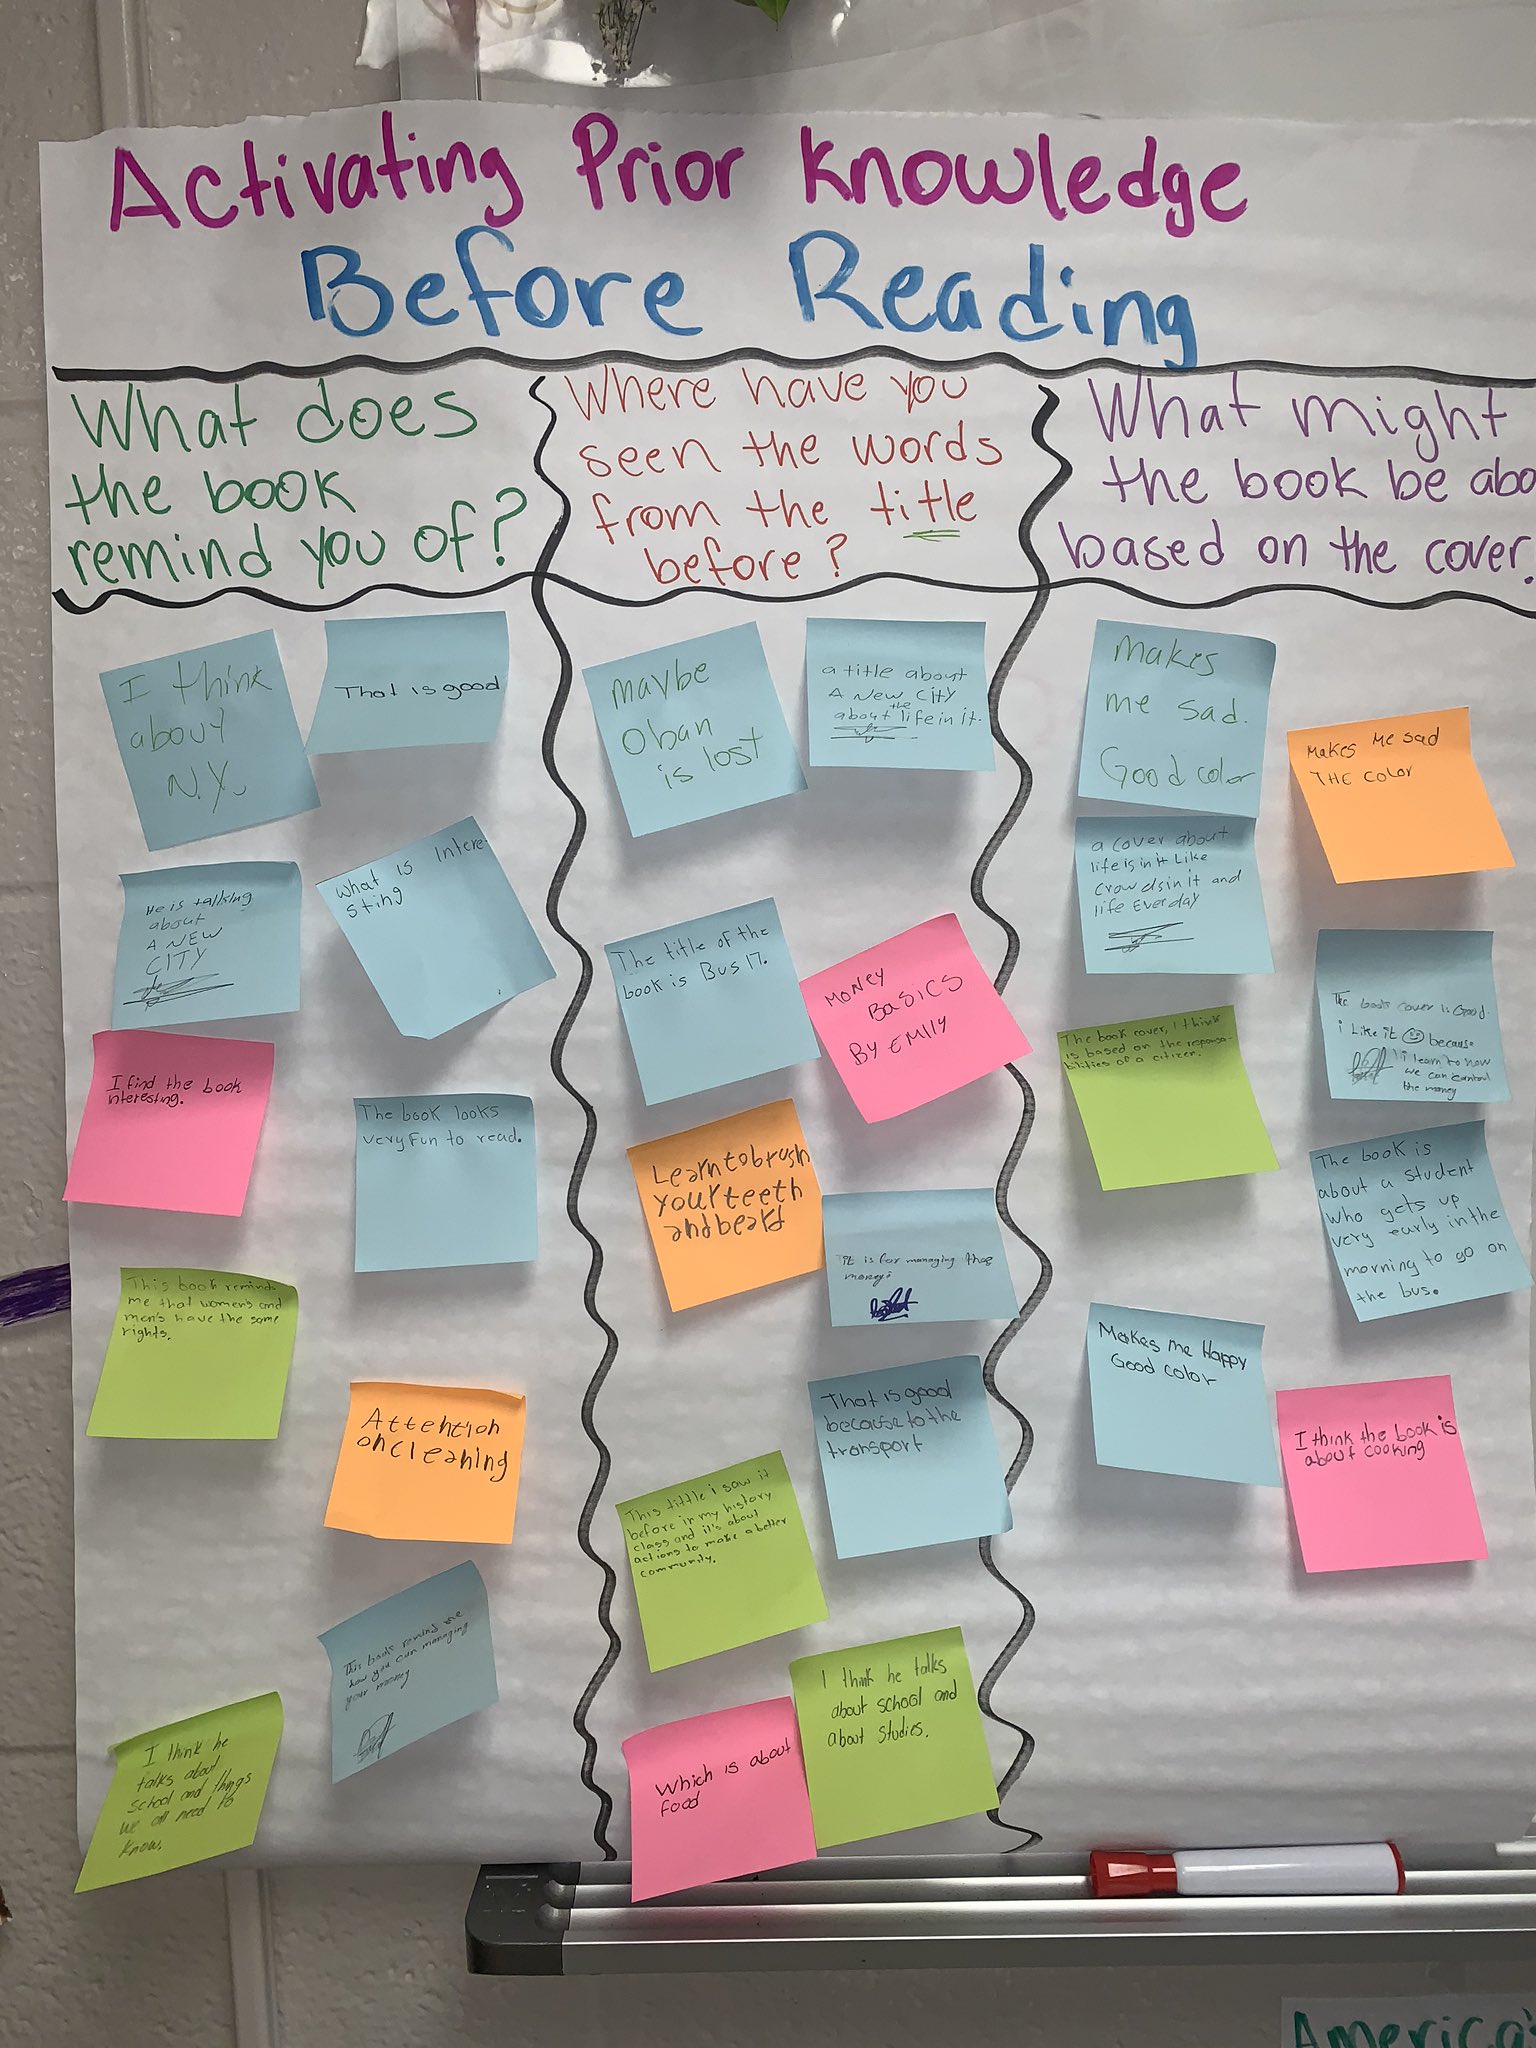 Emily Fɾαɳƈιʂ 💫 on X: An independent writing activity could be answering  questions on sticky-notes and adding it to an anchor chart! #pd4uandme   / X